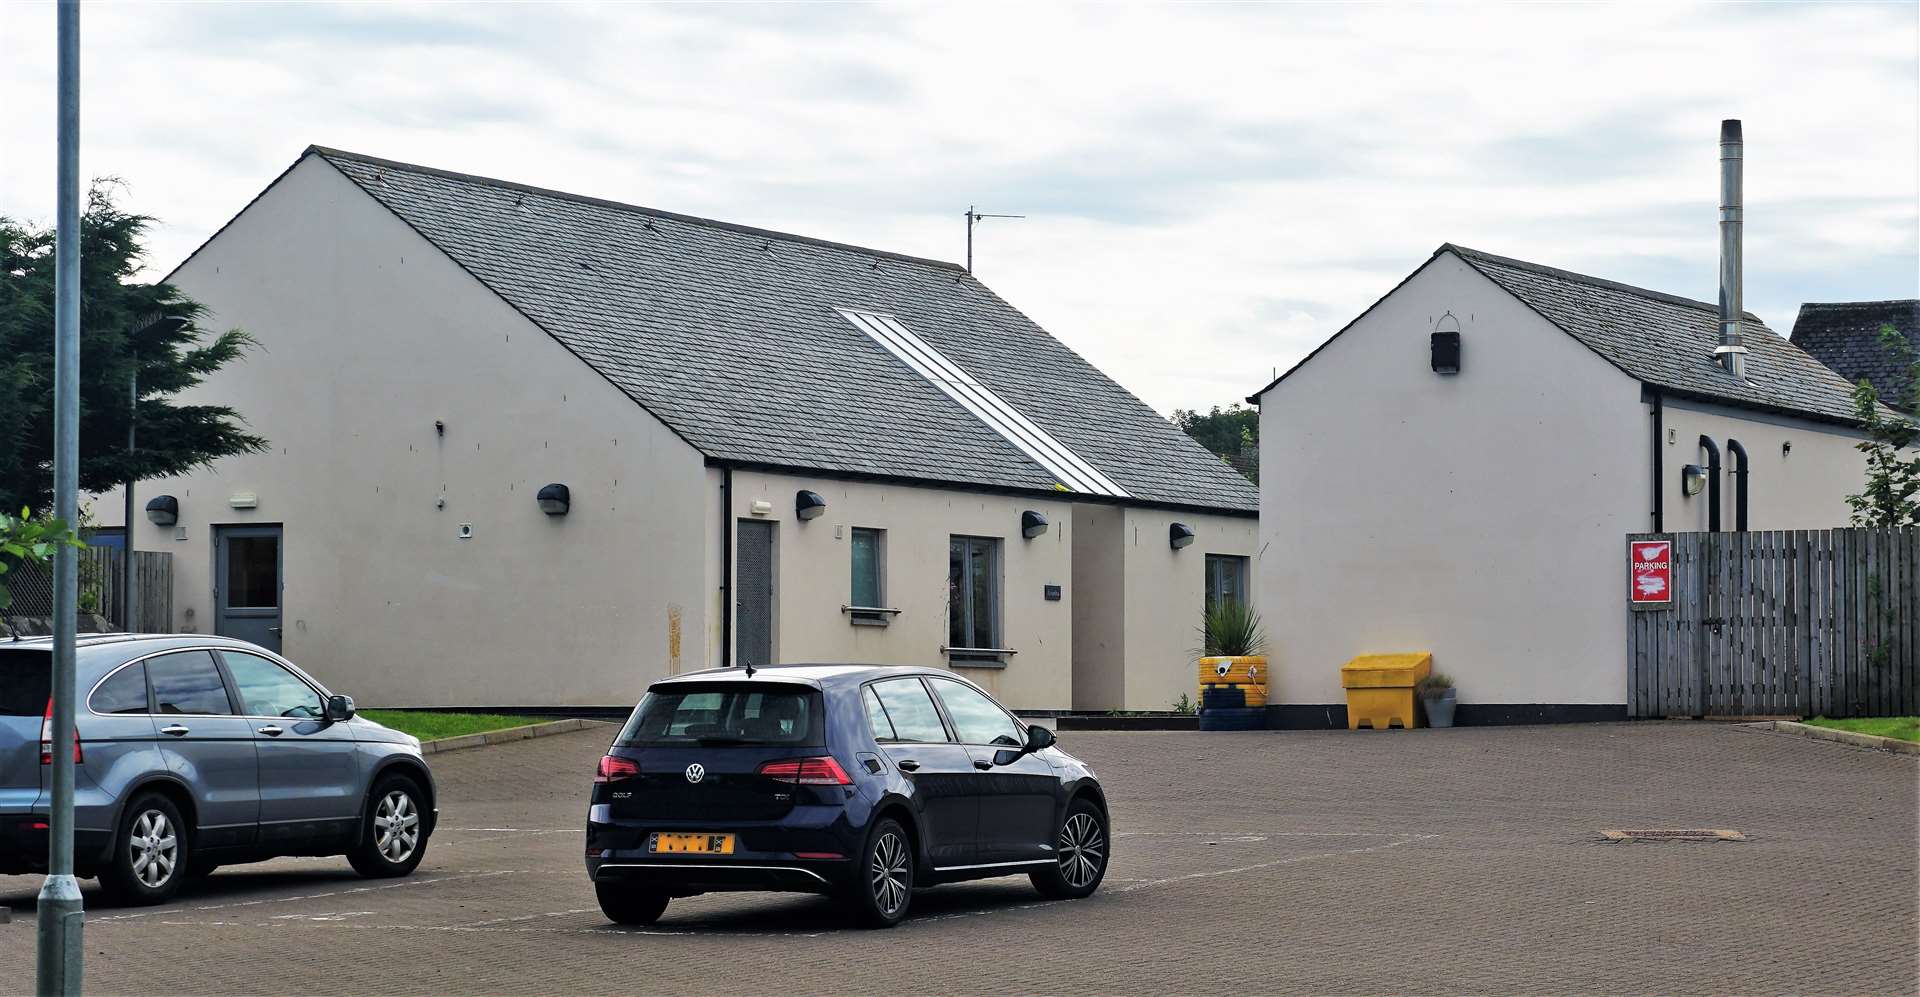 Avonlea care home in Wick could be closed by Christmas